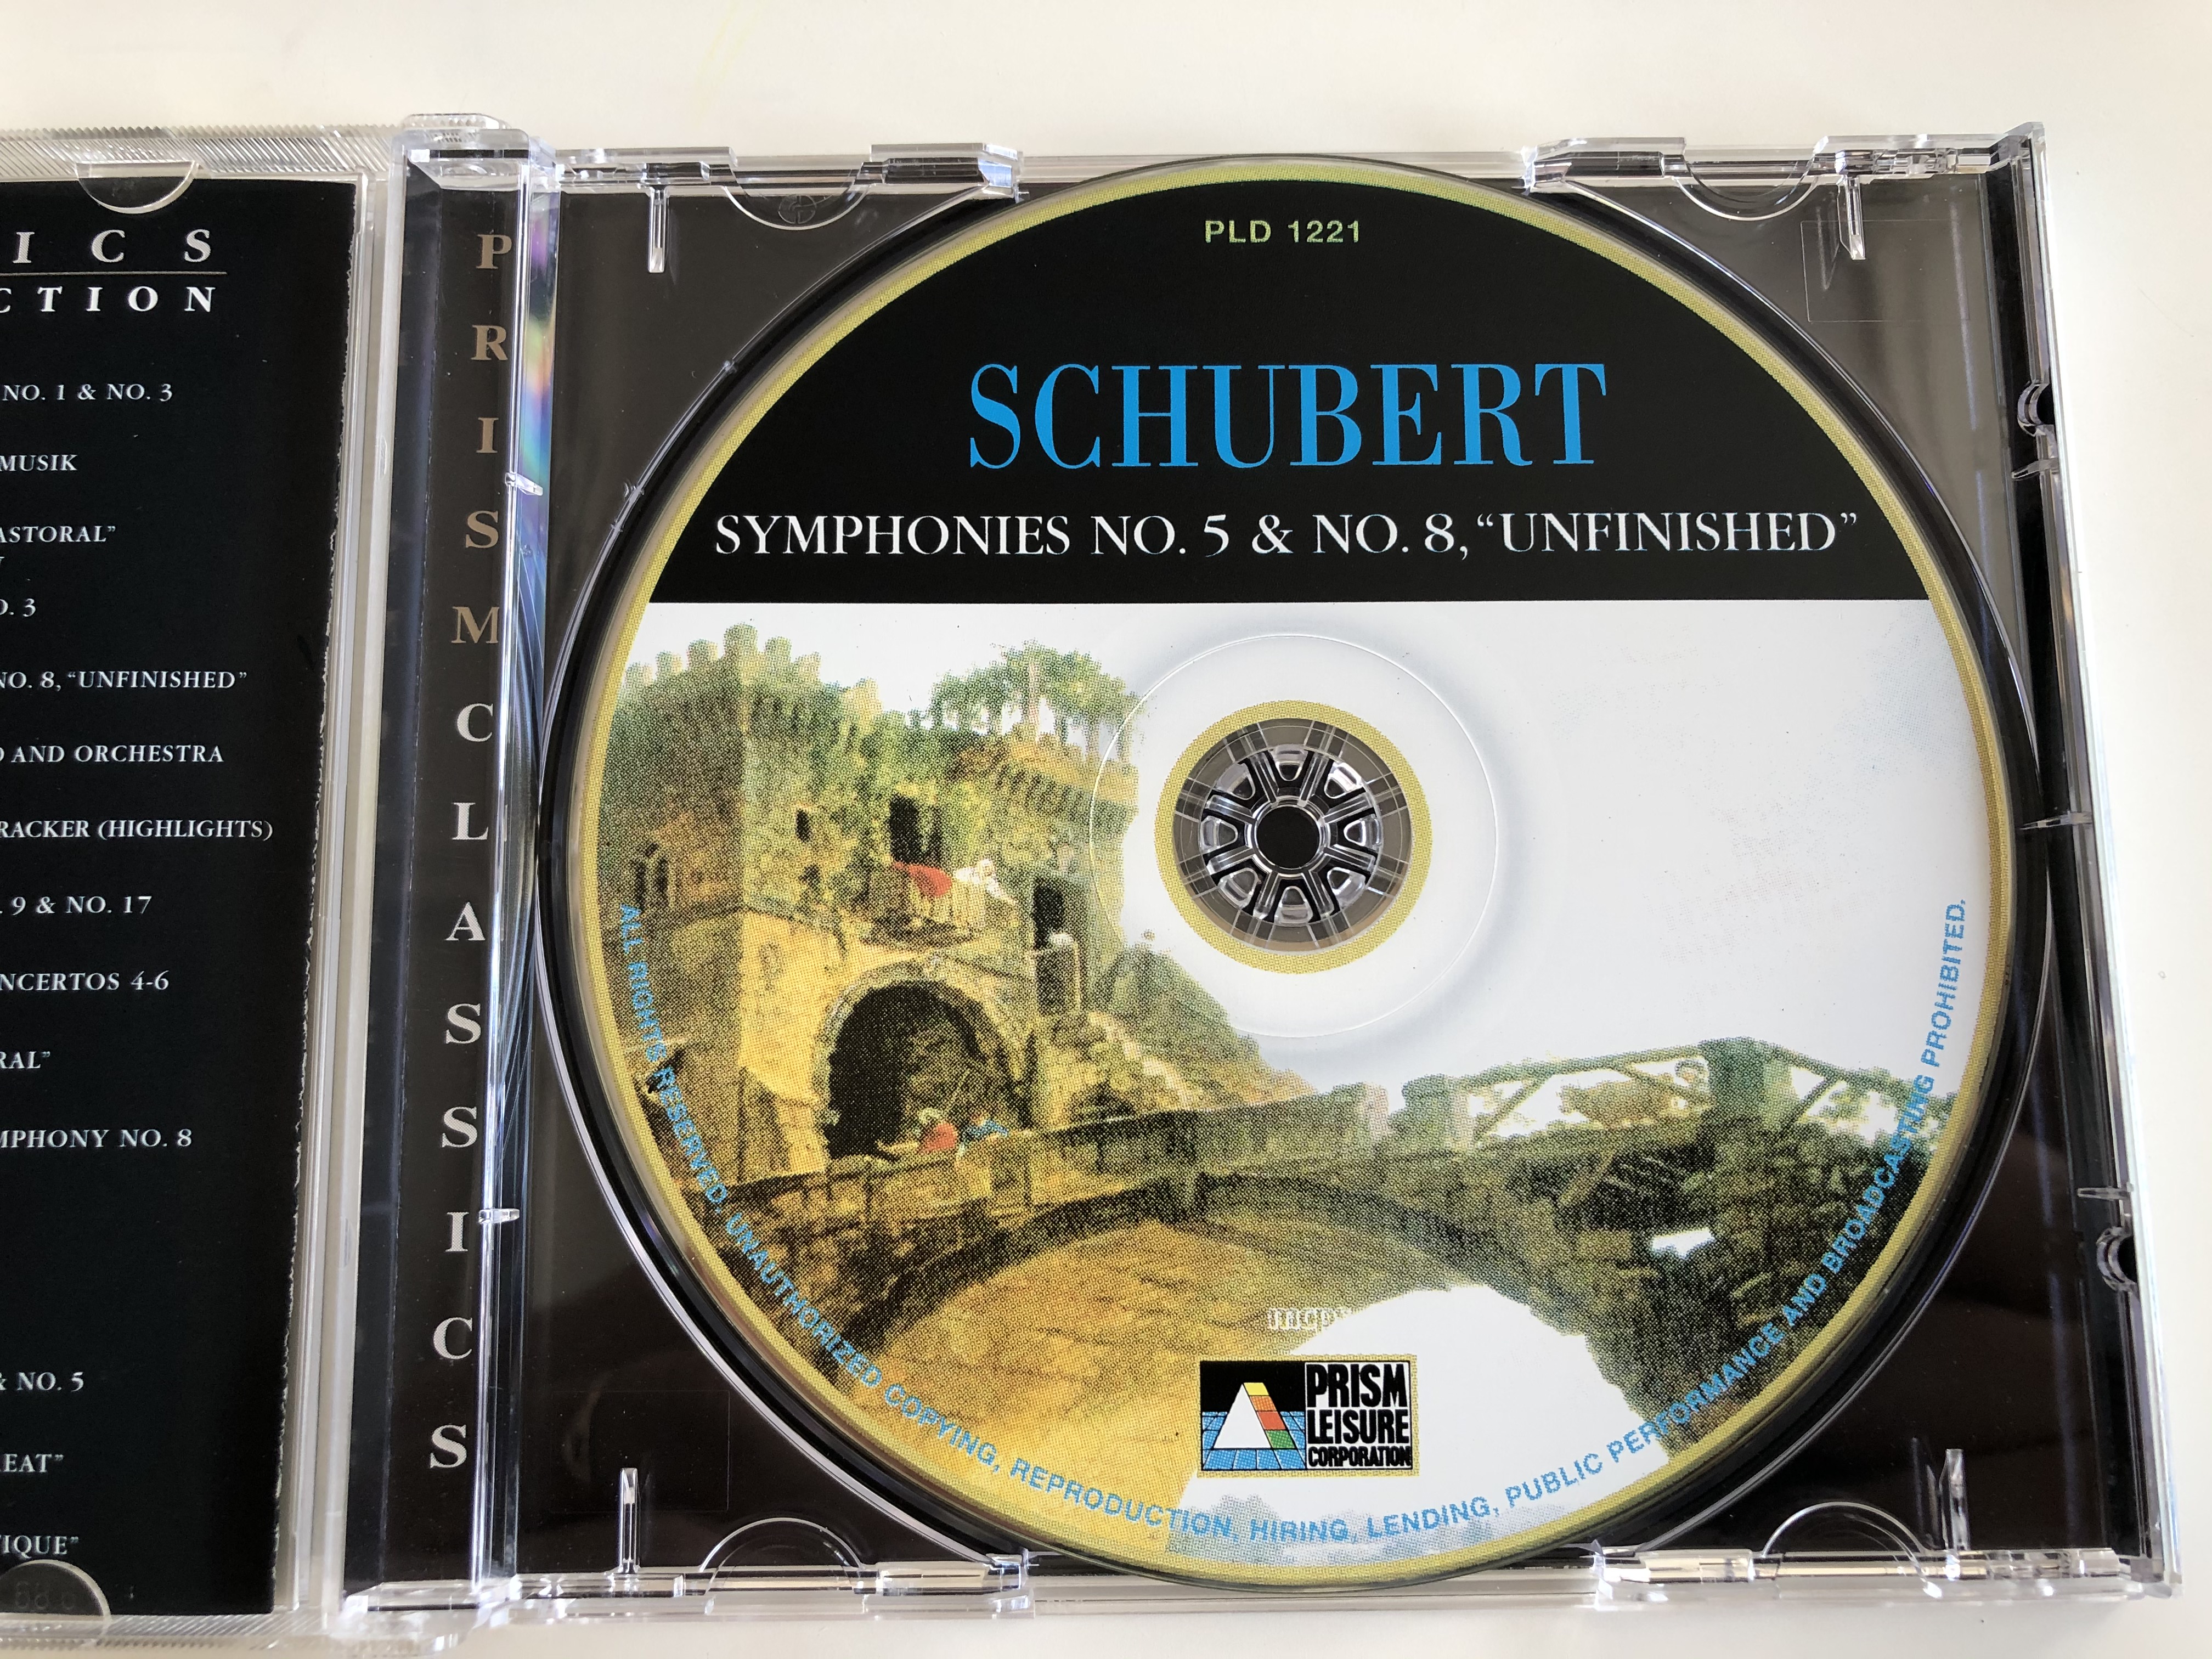 schubert-symphonies-no.5-no.8-unfinished-georgian-simi-festival-orchestra-playing-time-7242-prism-leisure-audio-cd-1997-pld-1221-3-.jpg